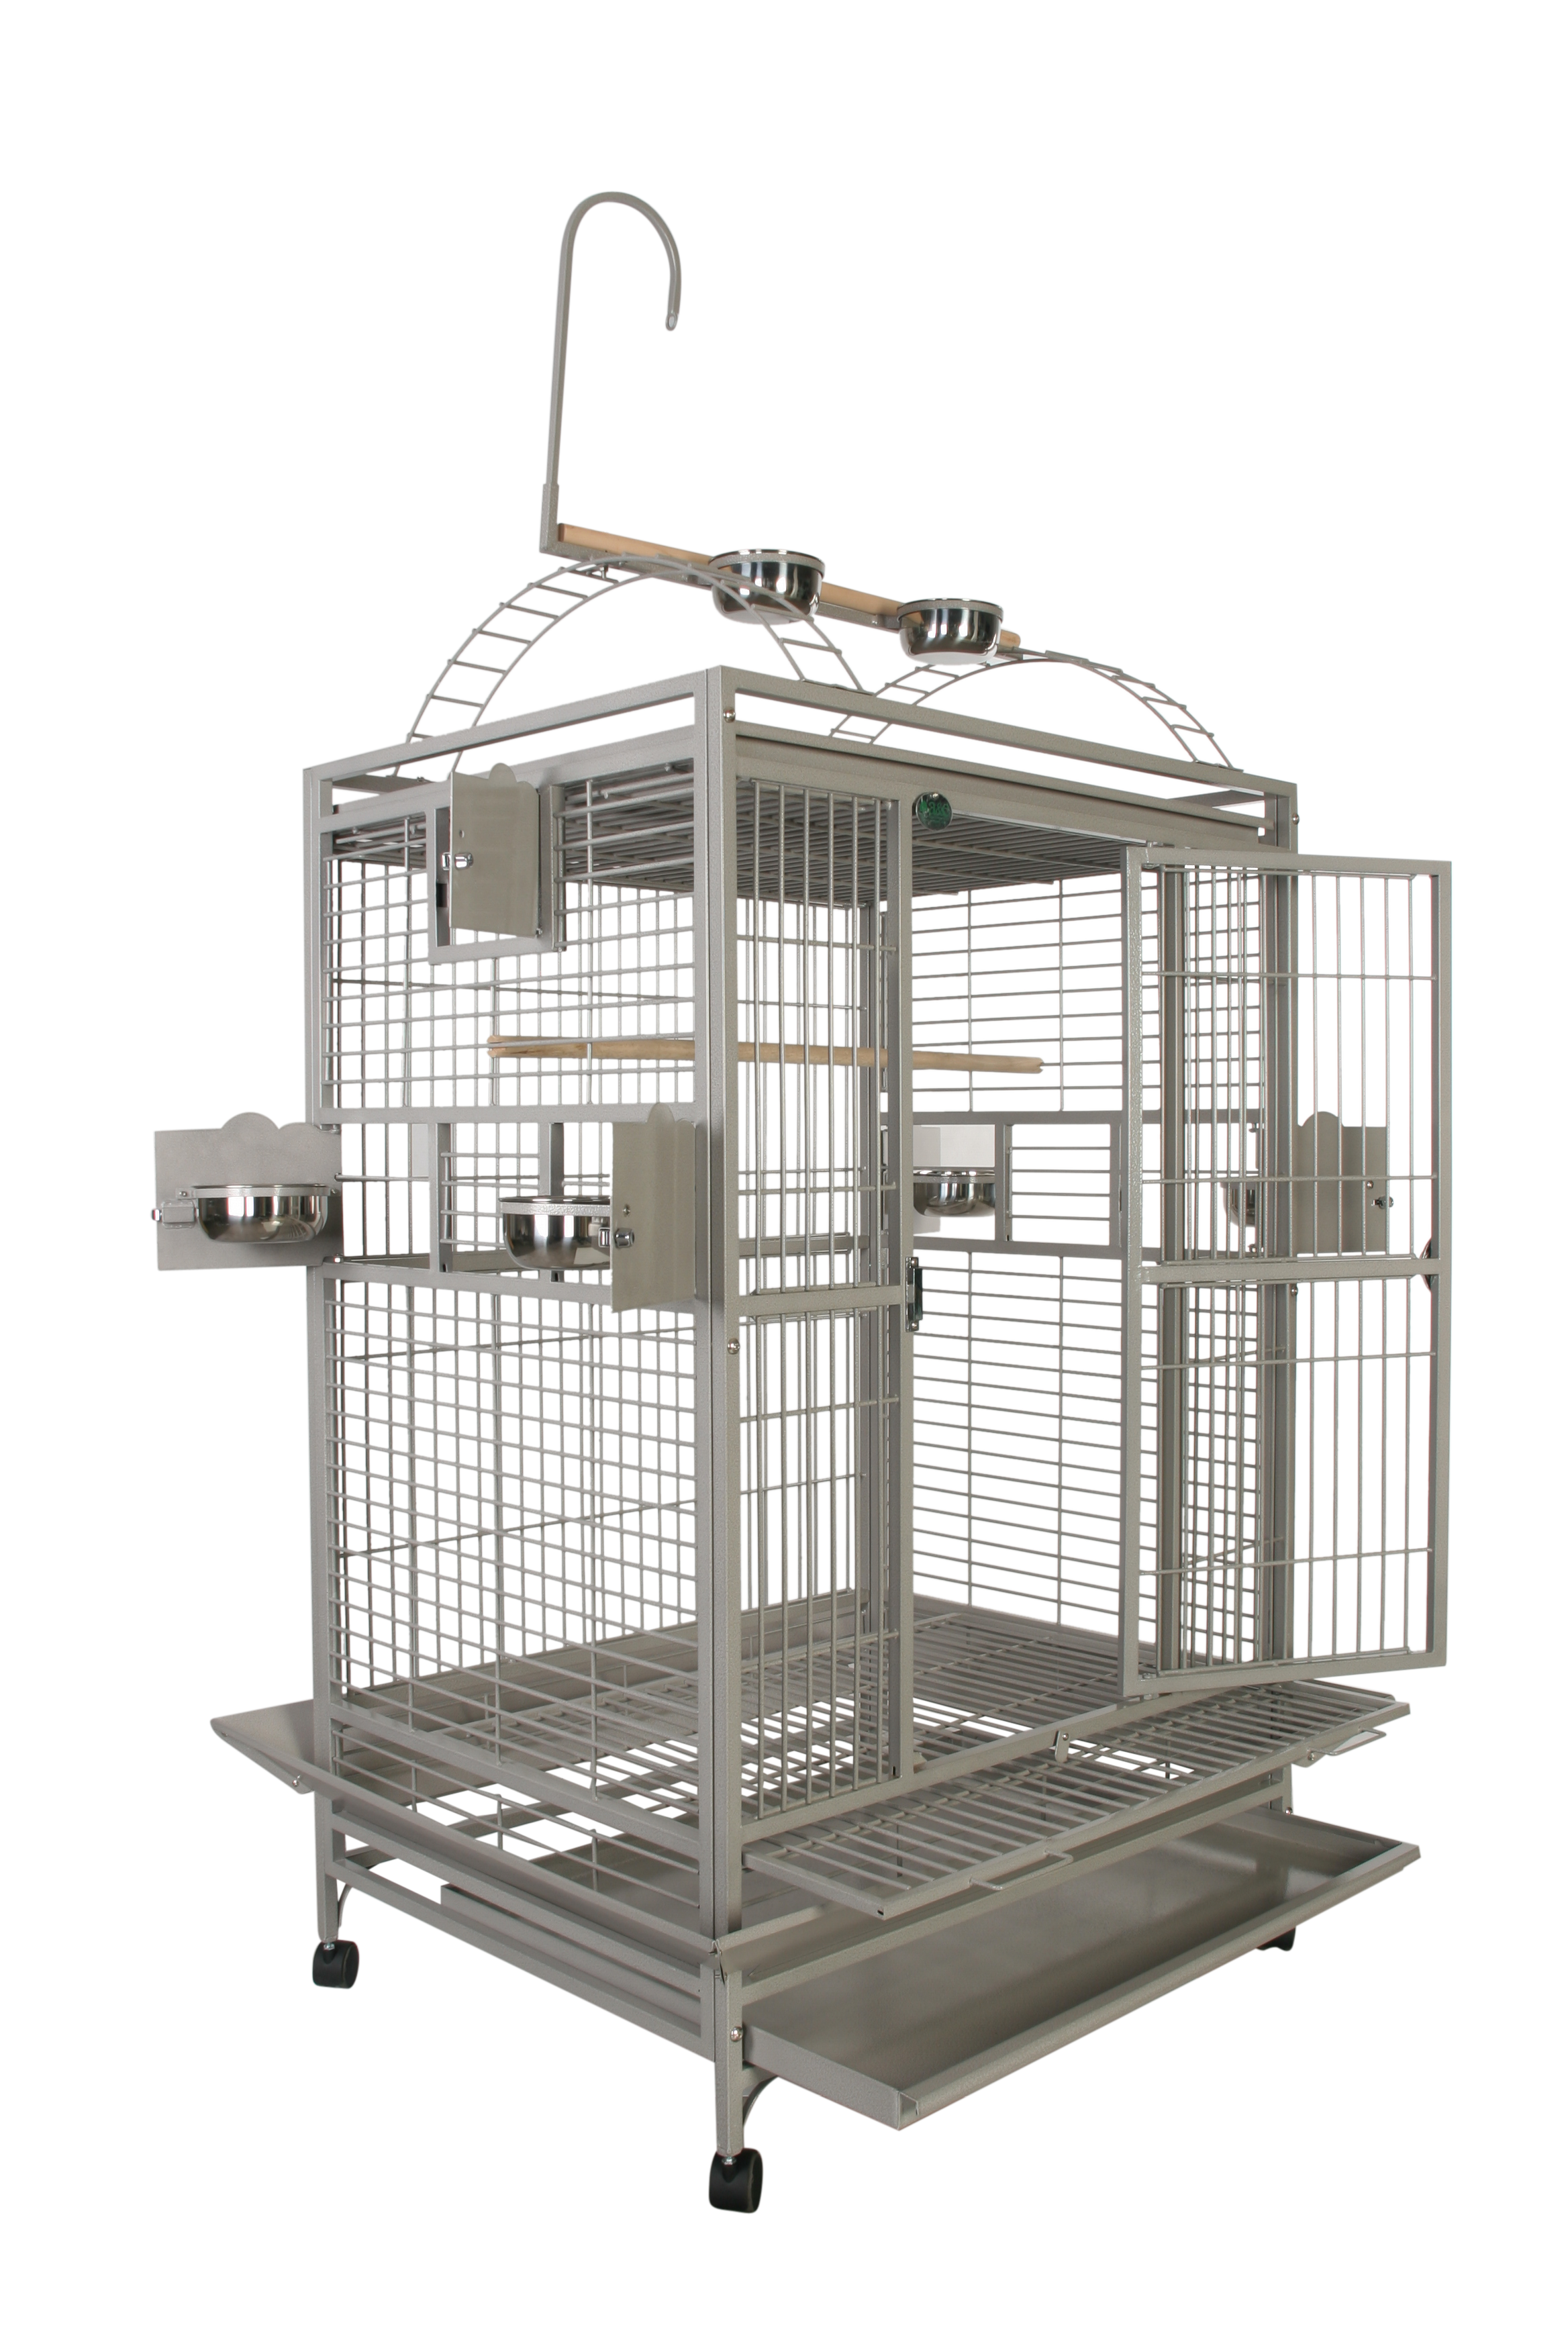 A&E Cage Co. 36"x28" Majestic Play Top Bird Cage